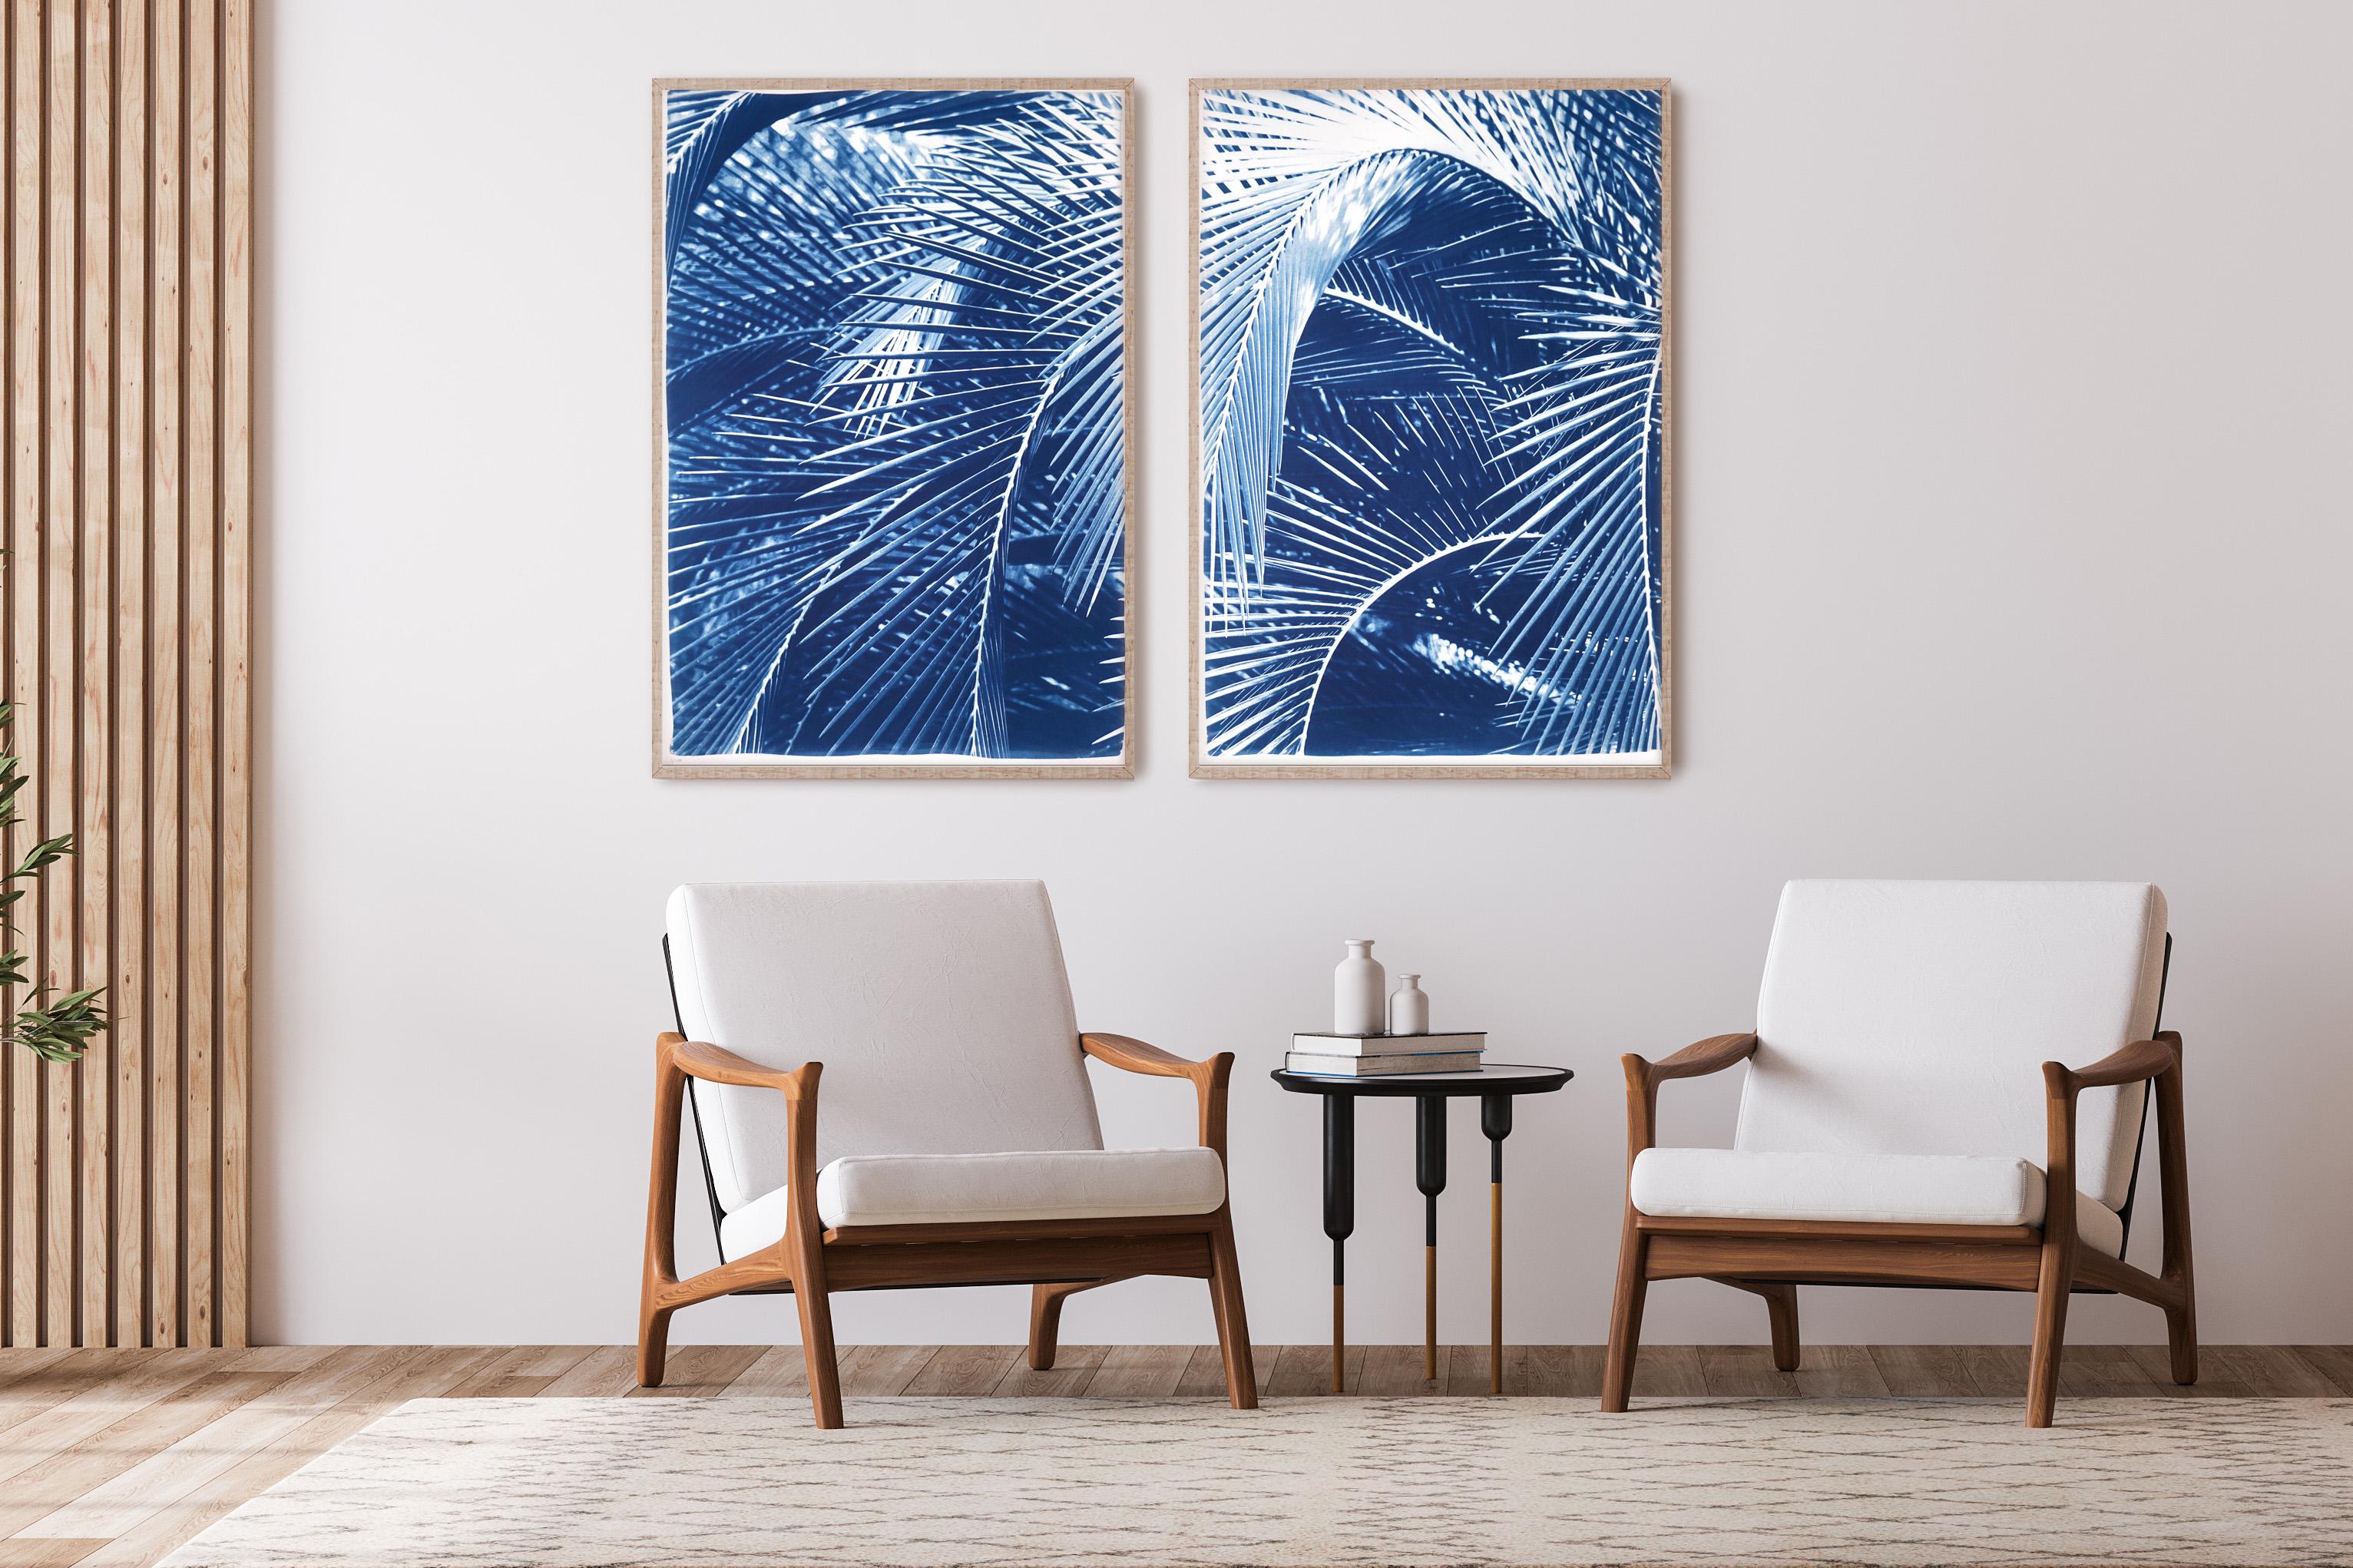 Lush Palm Bushes, Botanical Diptych, Still Life in Blue Tones, Tropical Style - Print by Kind of Cyan